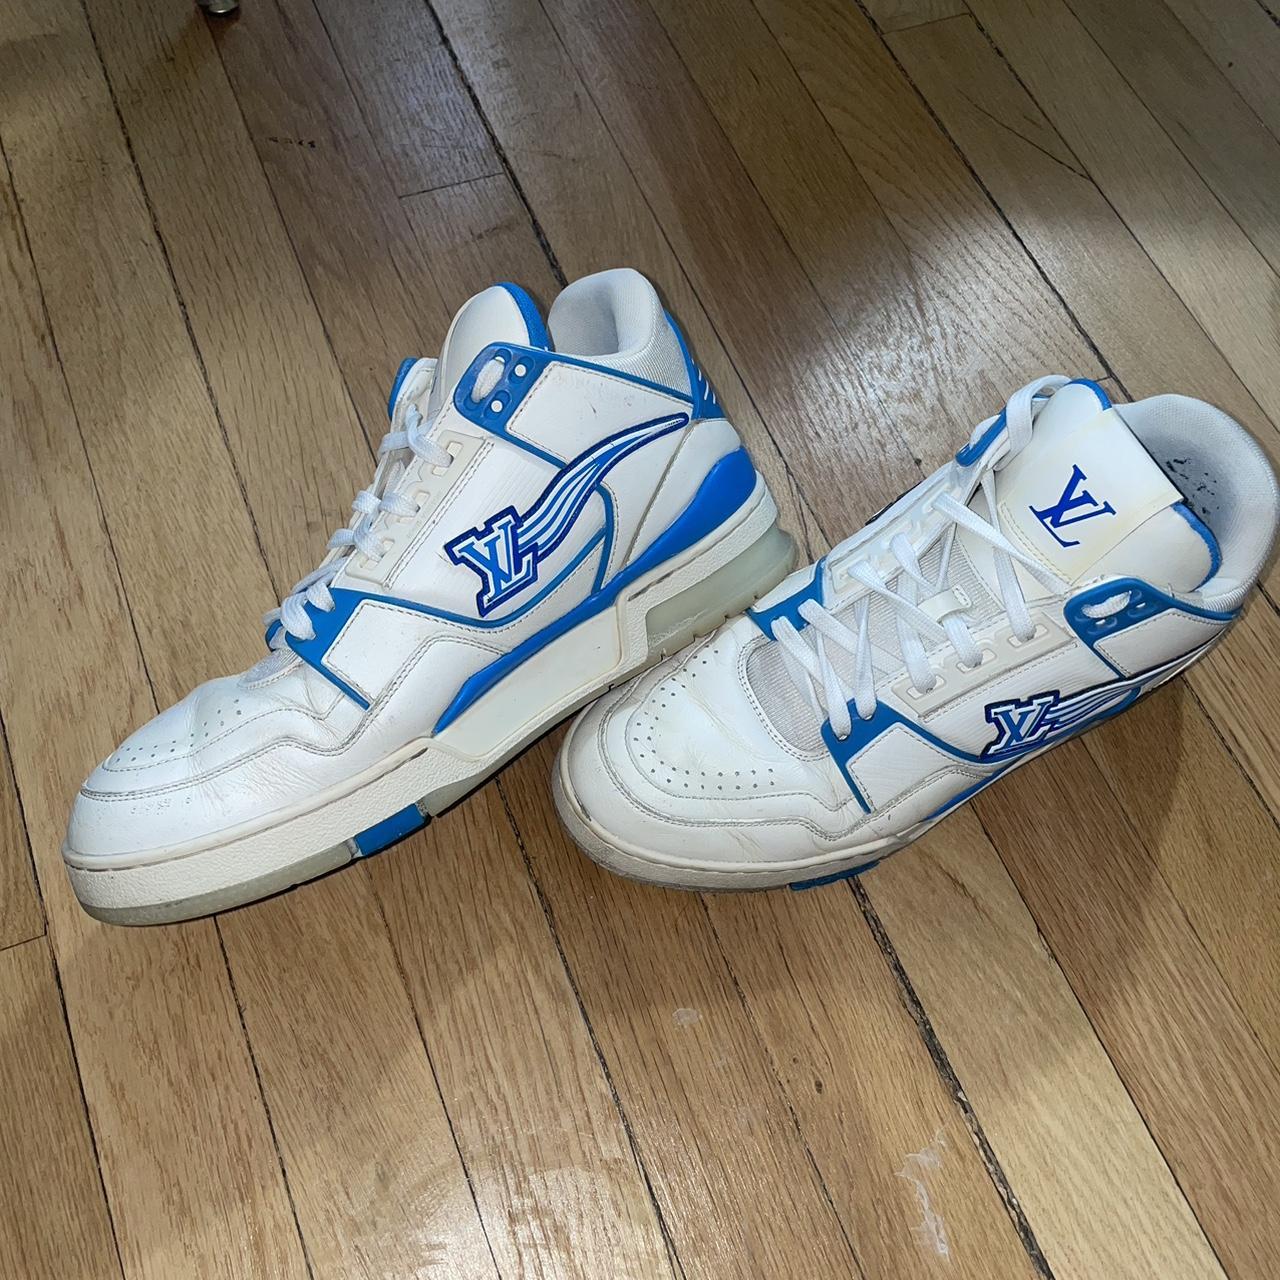 louis vuitton ' blue white ' shoes , hard to find - Depop